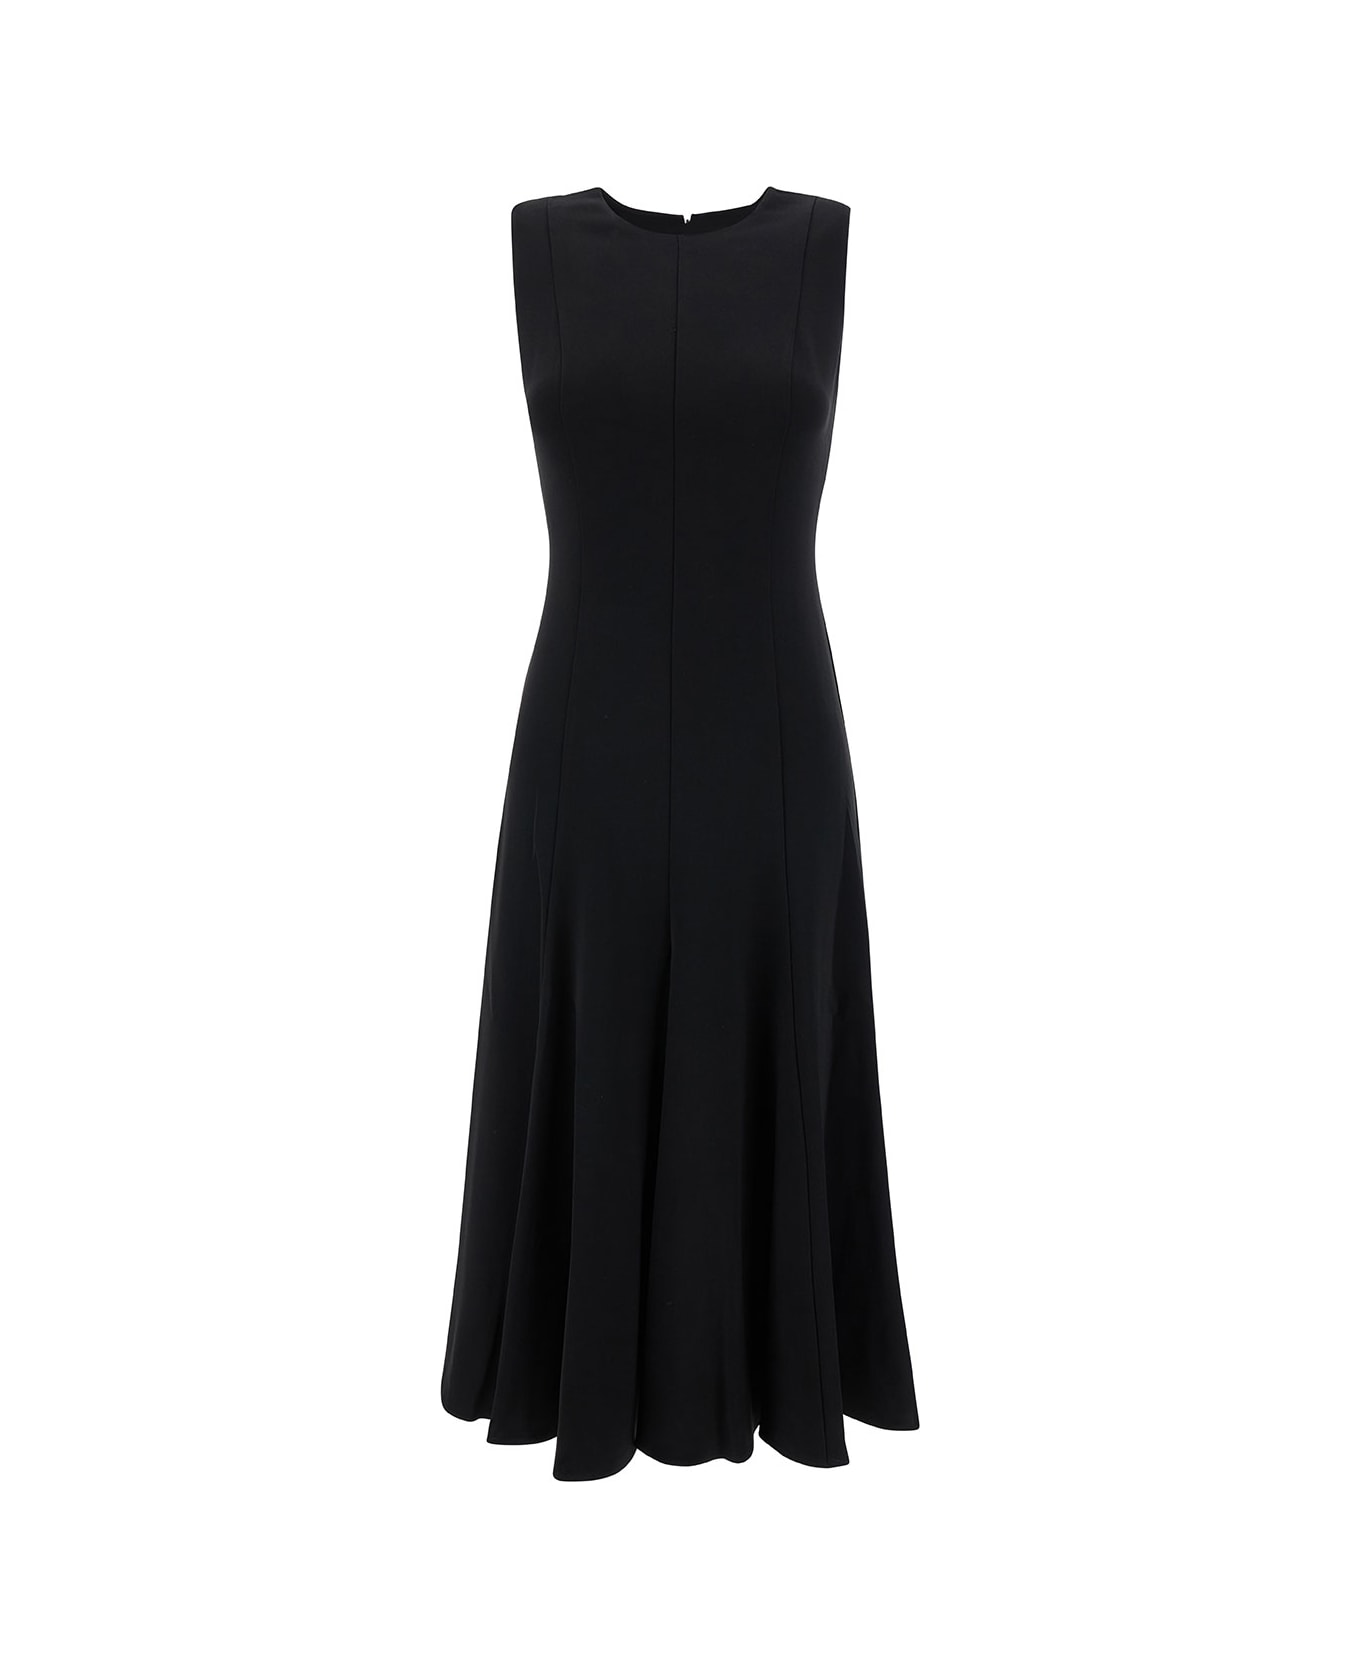 Theory Midi Black Sleeveless Dress With Pleated Skirt In Triacetate Blend Woman - Black